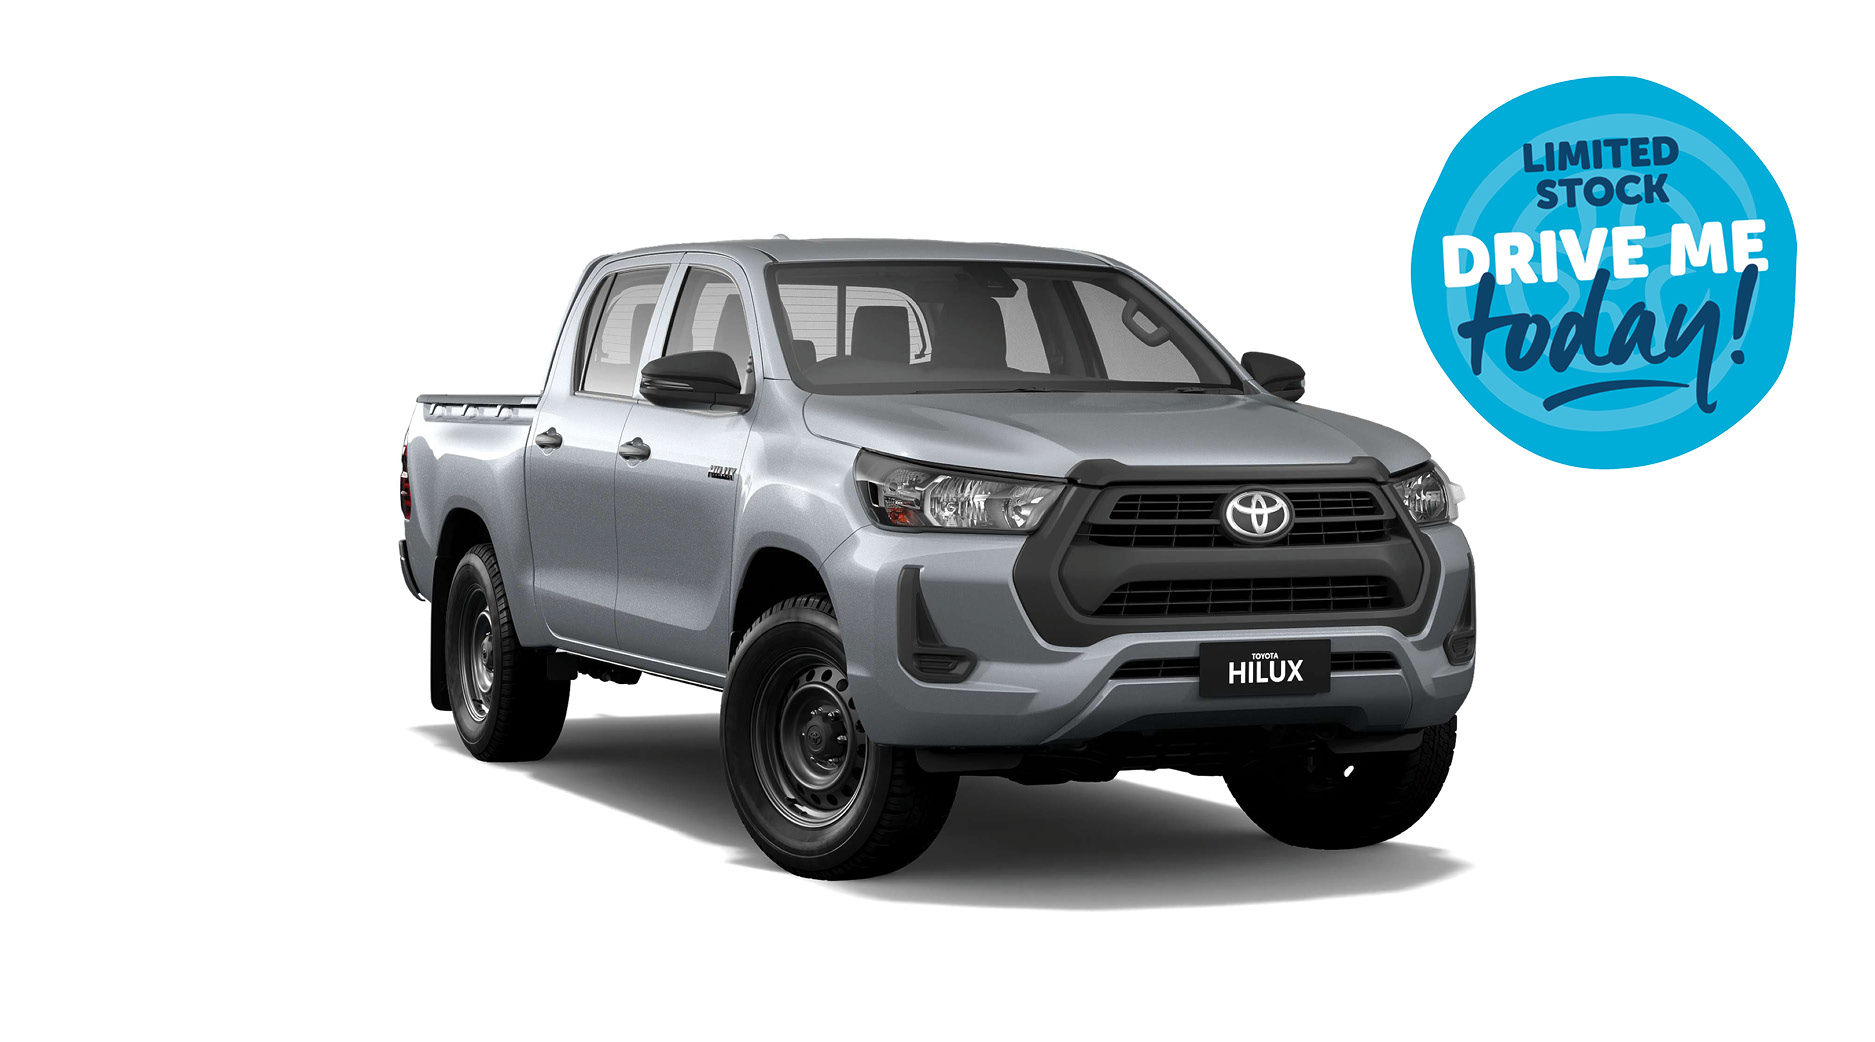 Toyota HiLux 4x2 WorkMate Hi Rider Double Cab Pick-up